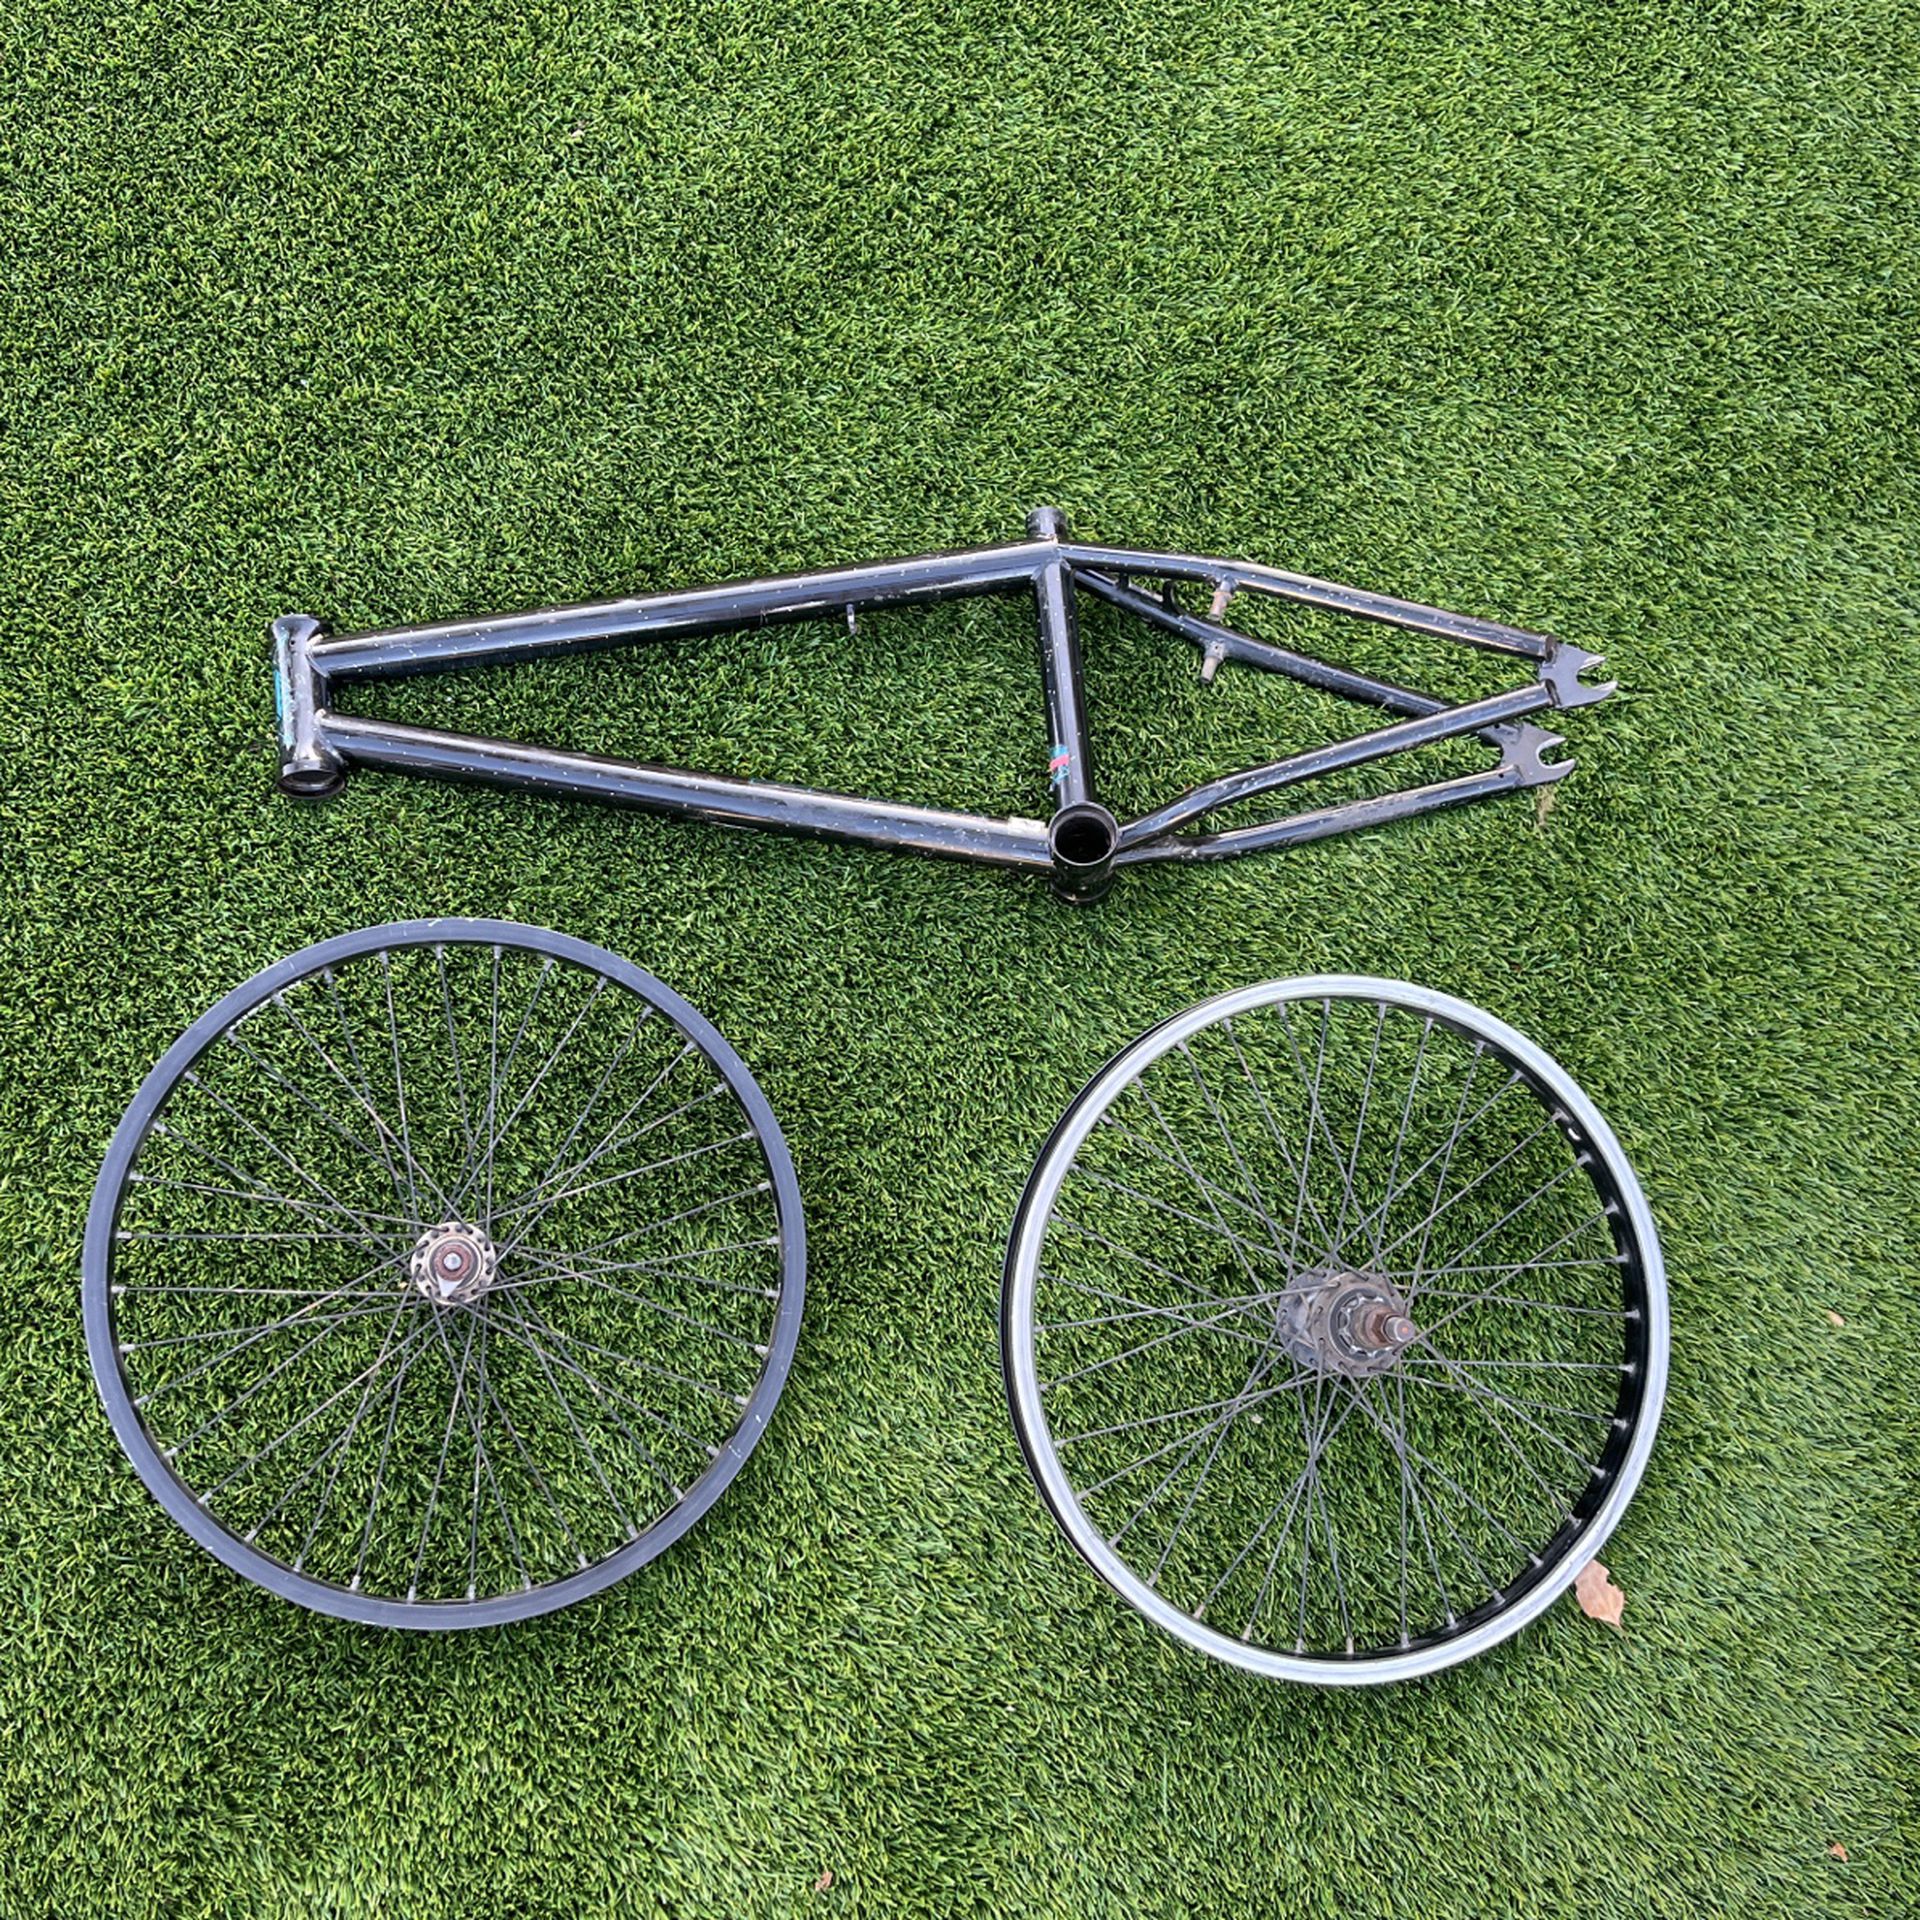 Kink Launch Frame And Front And Rear Wheel